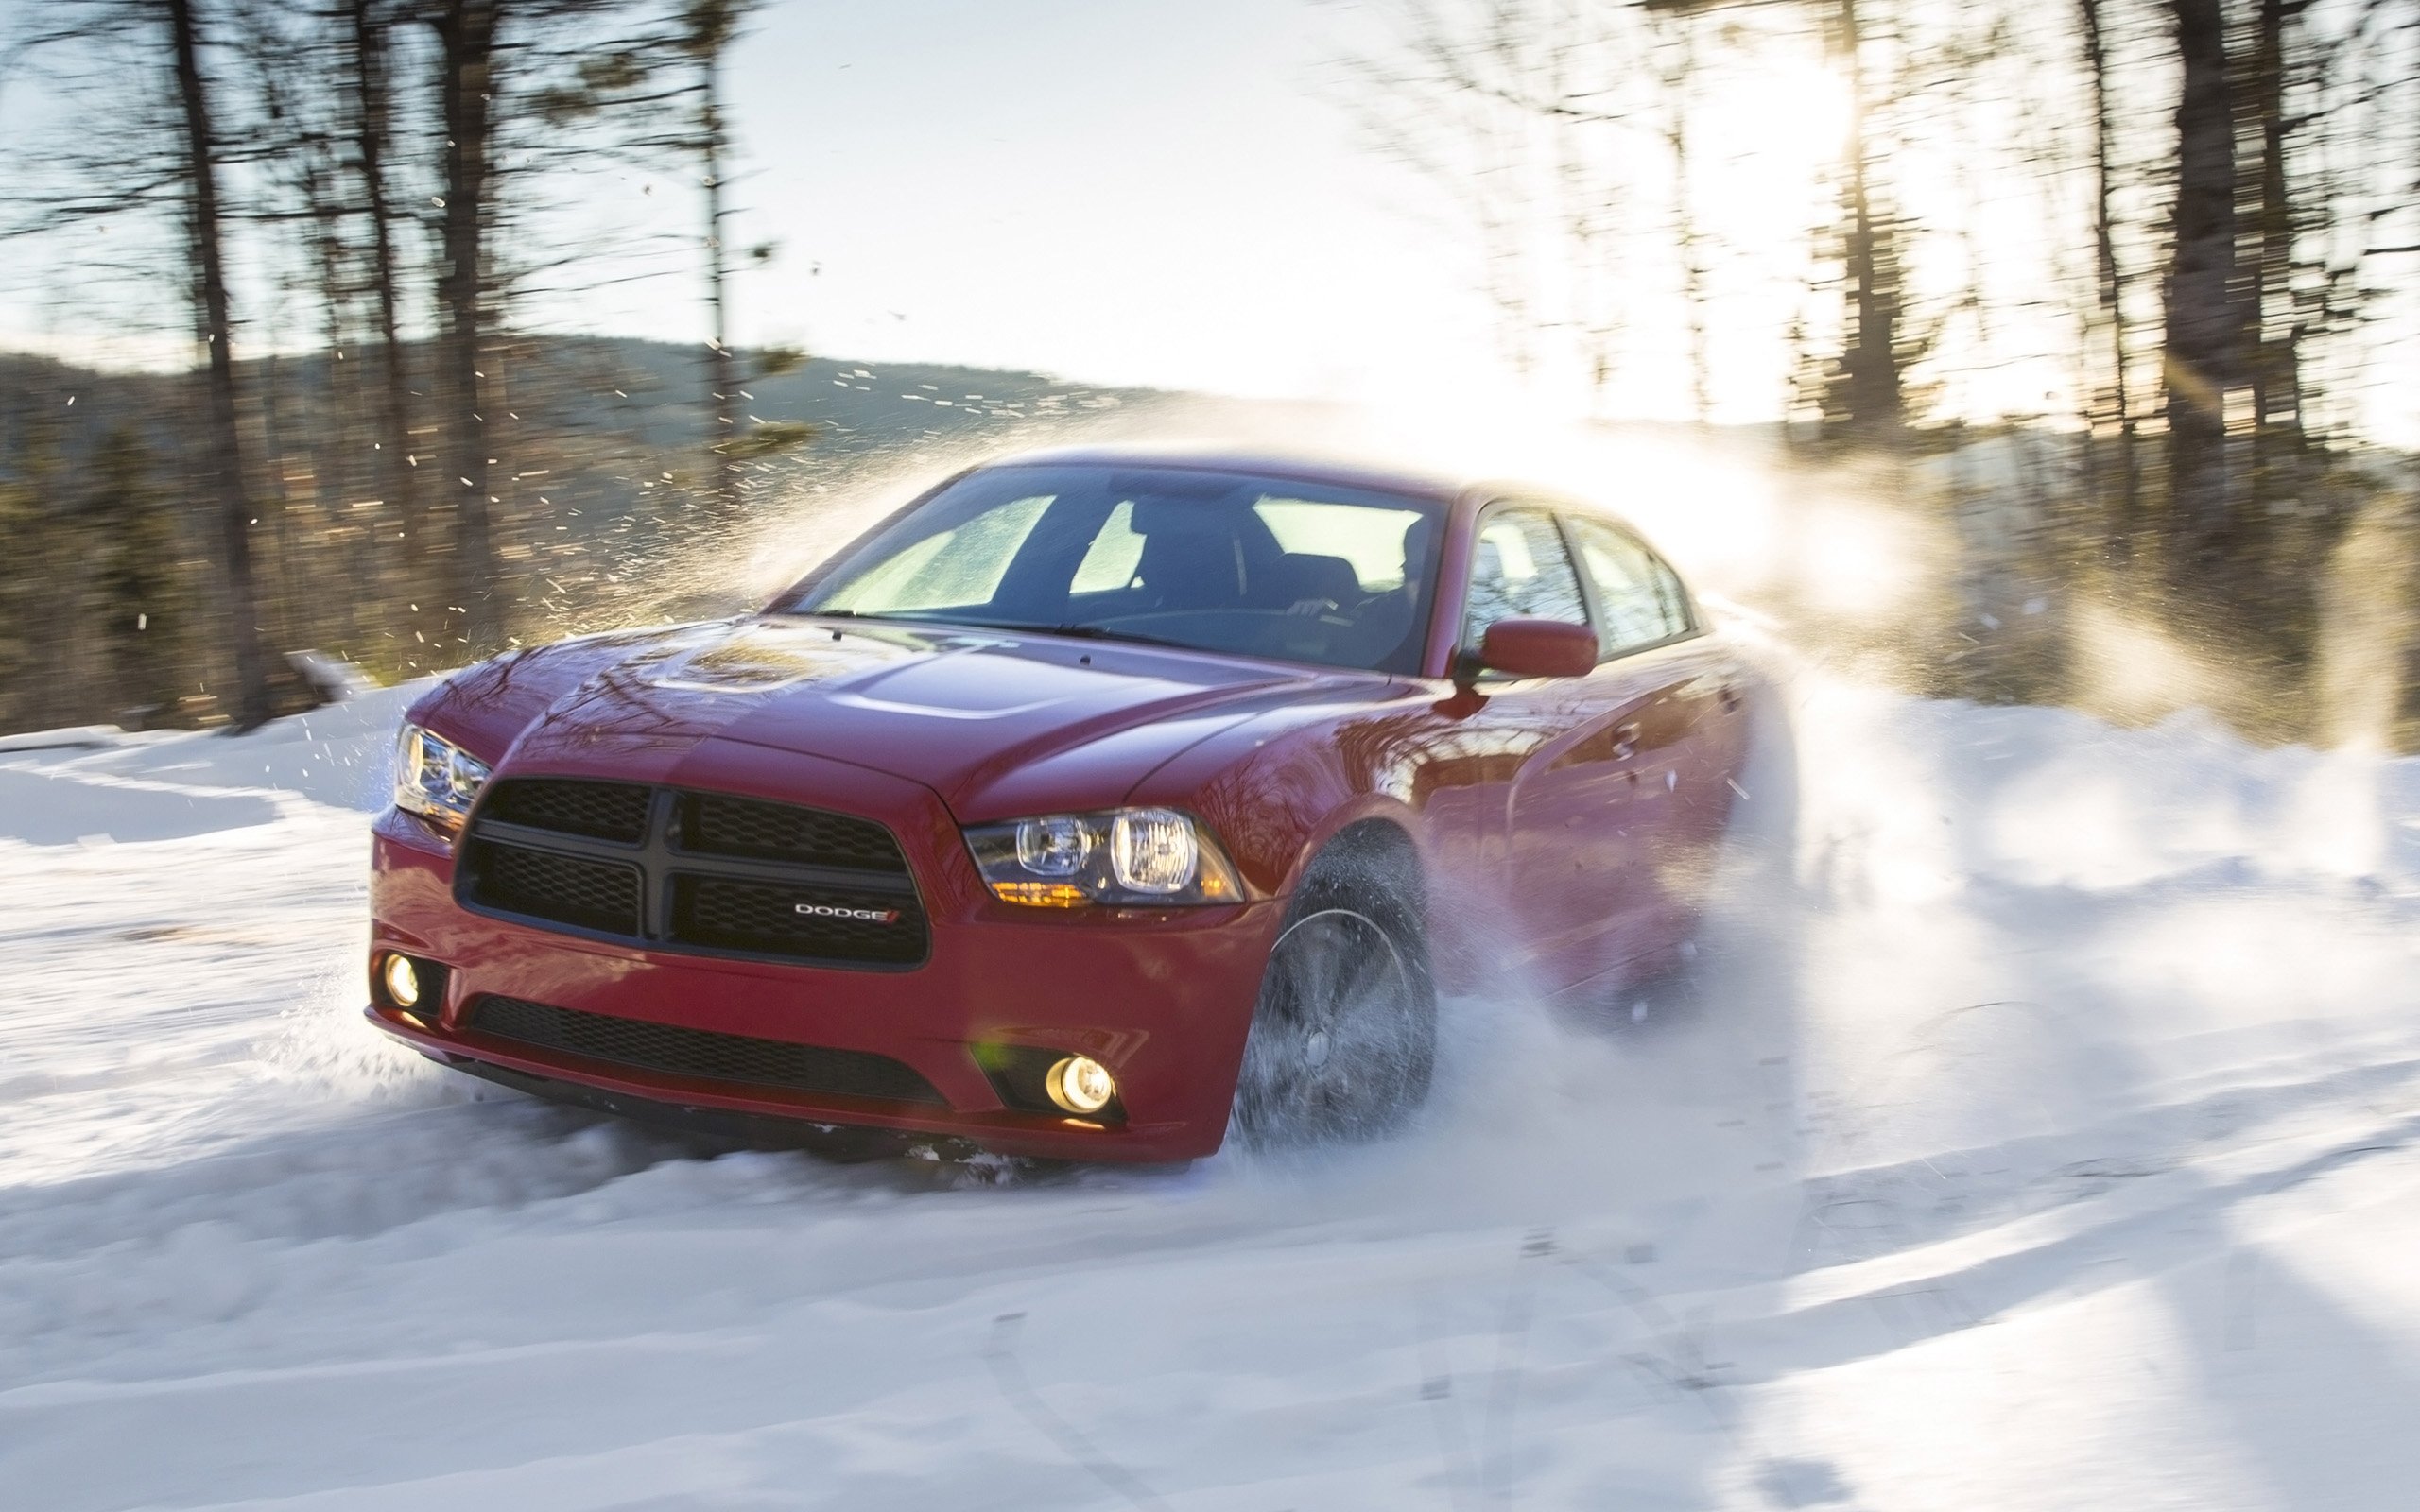 2014, Dodge, Charger, Awd, Sport, Muscle Wallpaper